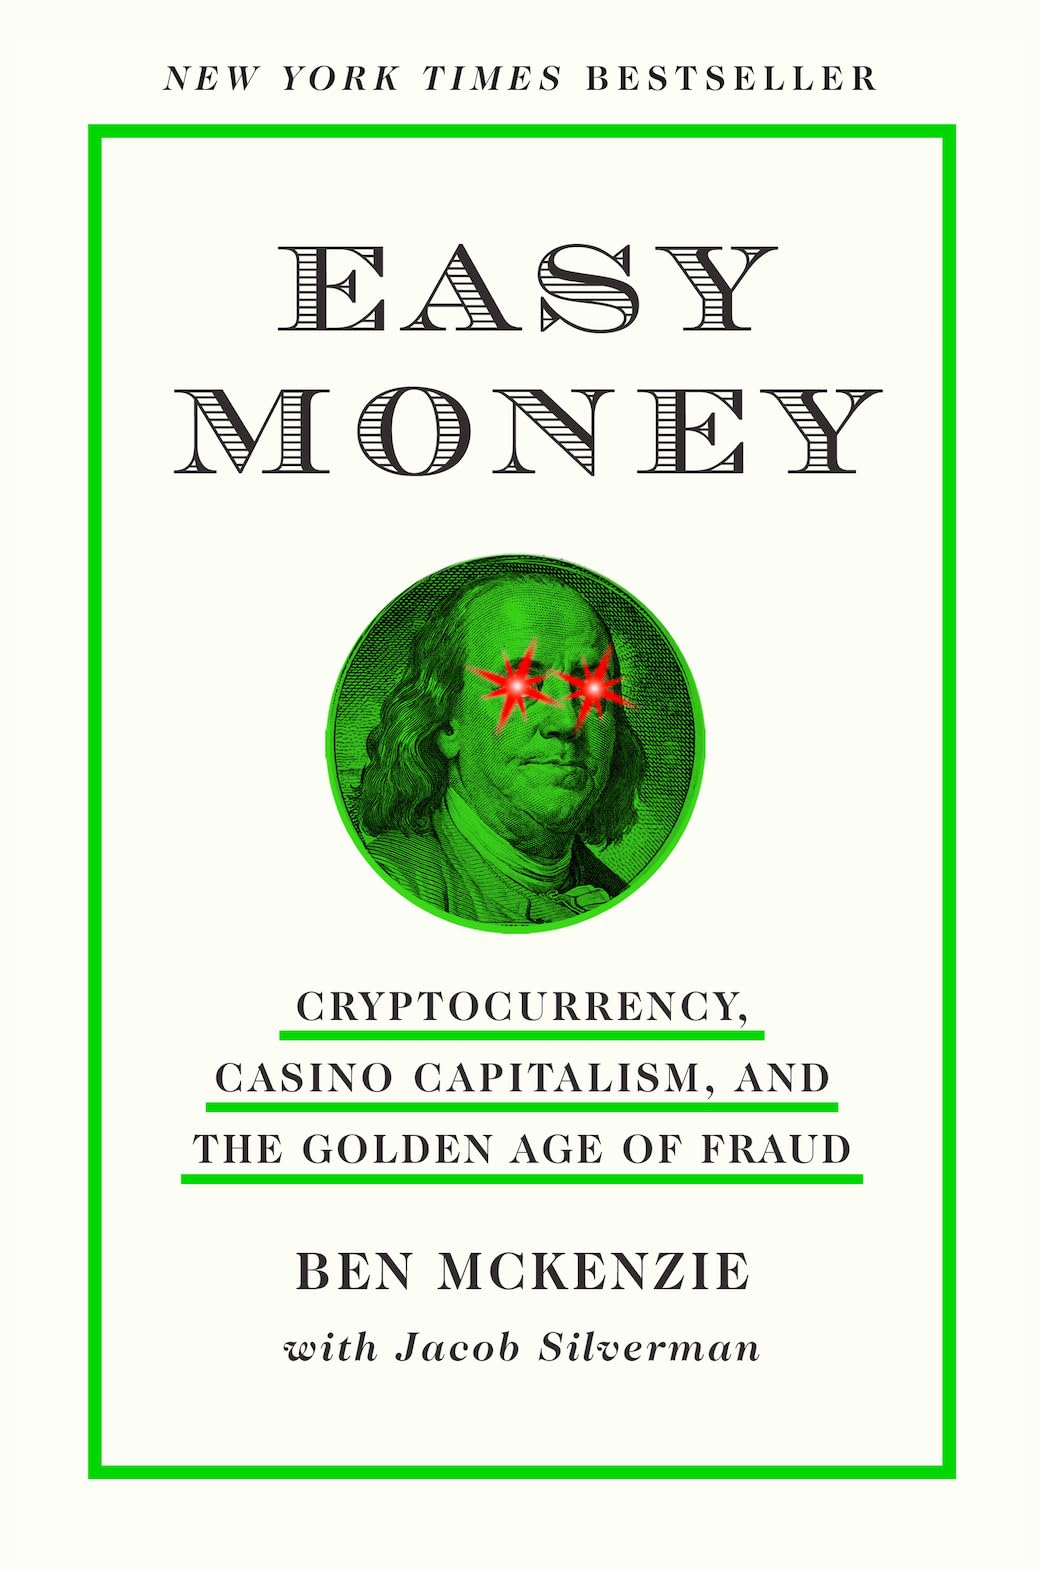 The cover of Easy Money: Cryptocurrency, Casino Capitalism, and the Golden Age of Fraud